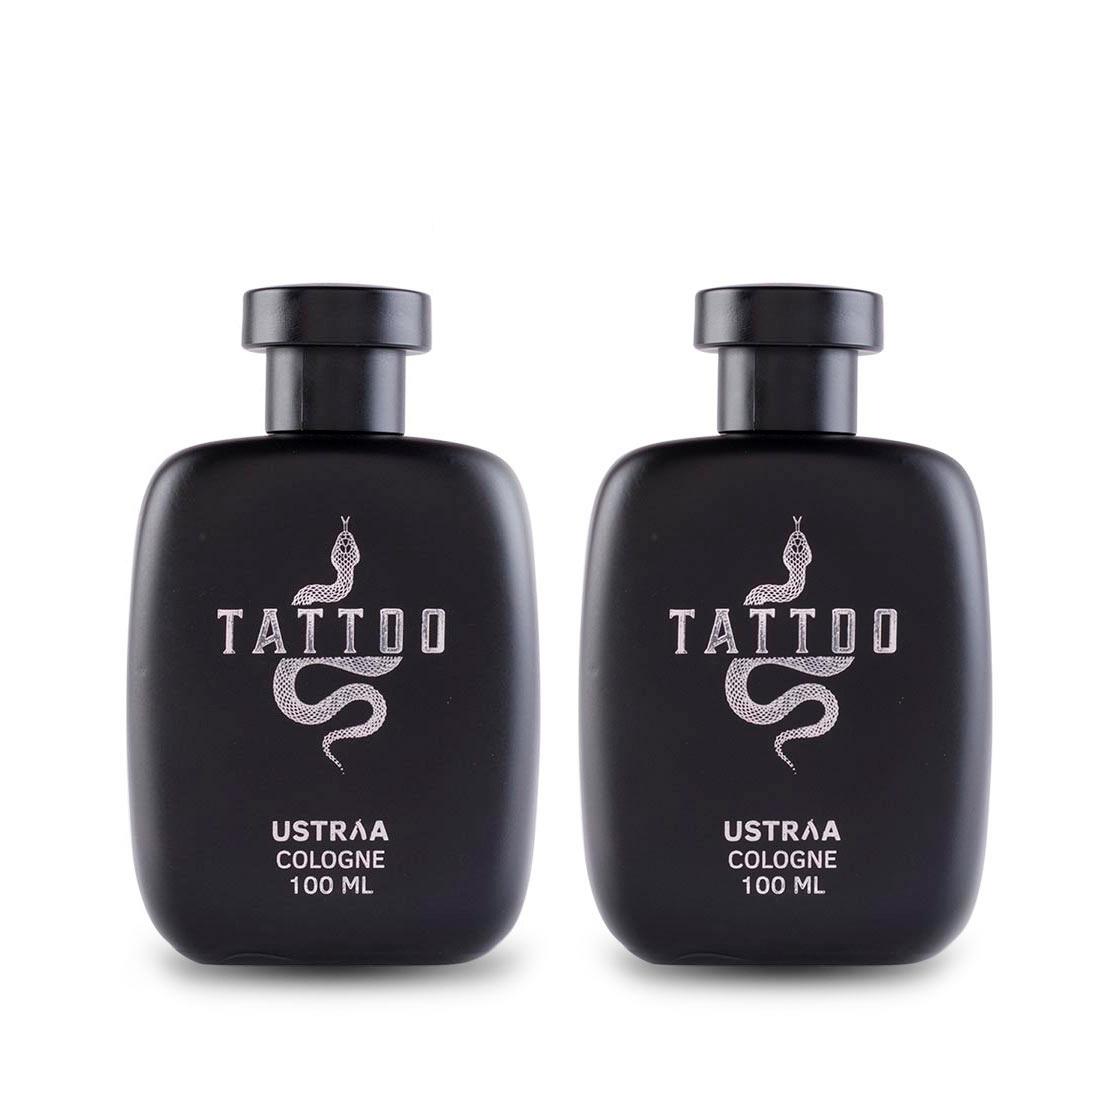 USTRAA Cologne Tattoo 100 ml Perfume for Men, Men Fragrance, Men Cologne,  Gents Cologne, Male Perfume, Man Perfume - Panchal Hygiene Products,  Udaipur | ID: 2851527222373